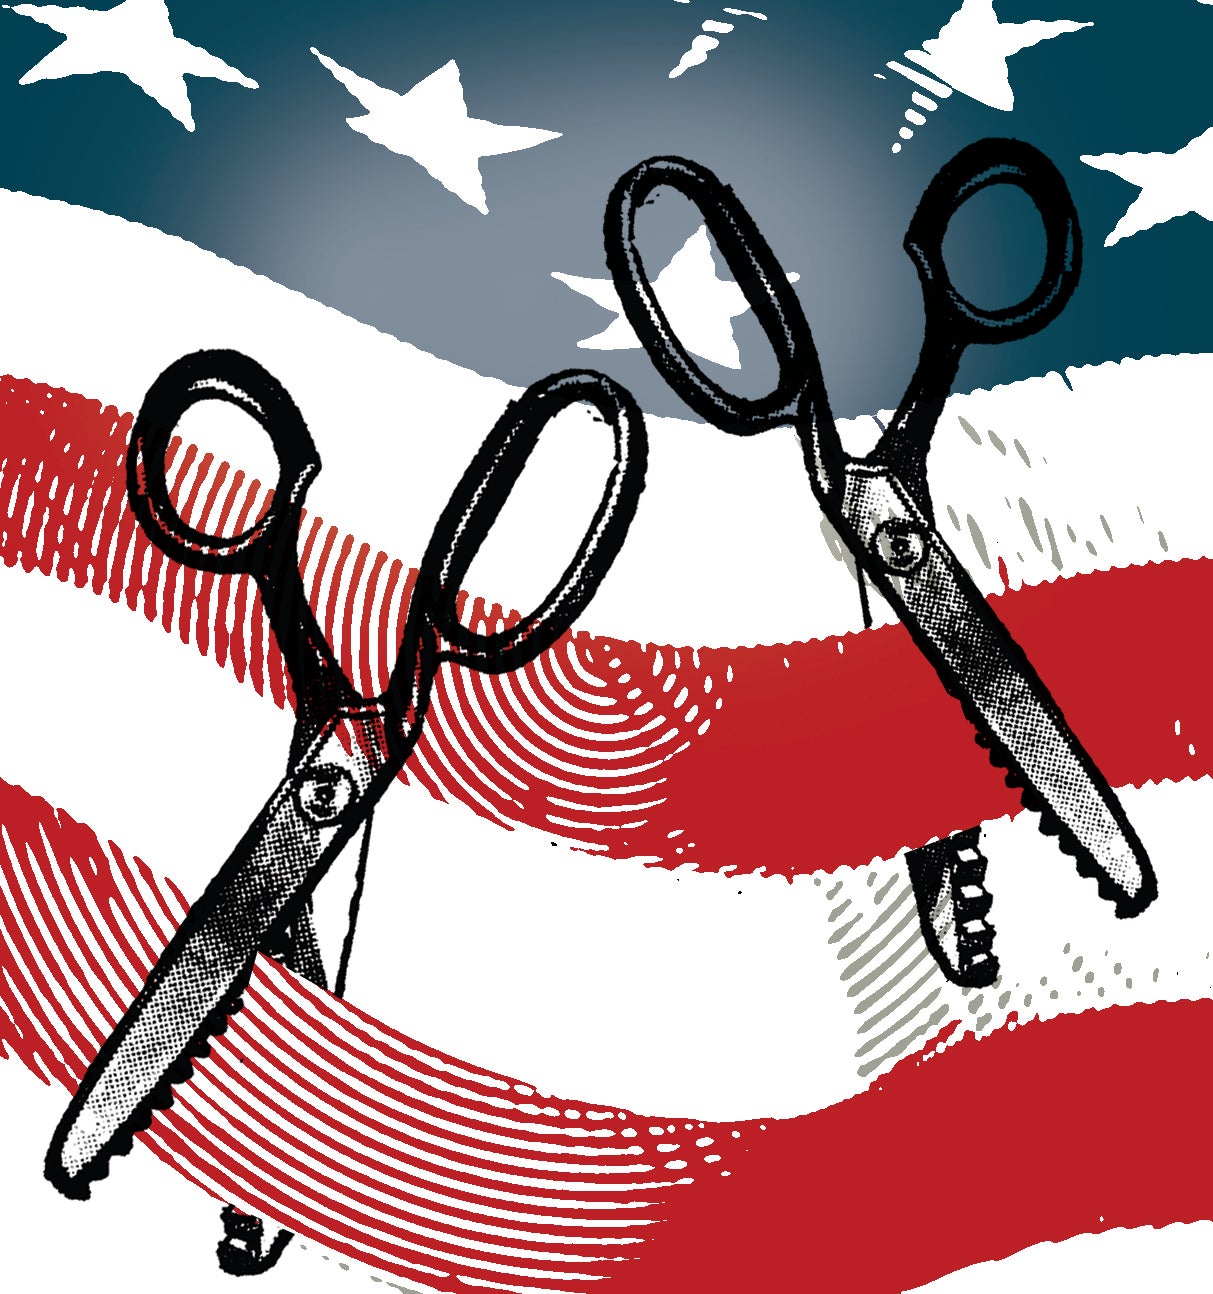 A stylized graphic of two scissors cutting the red stripes of the American flag